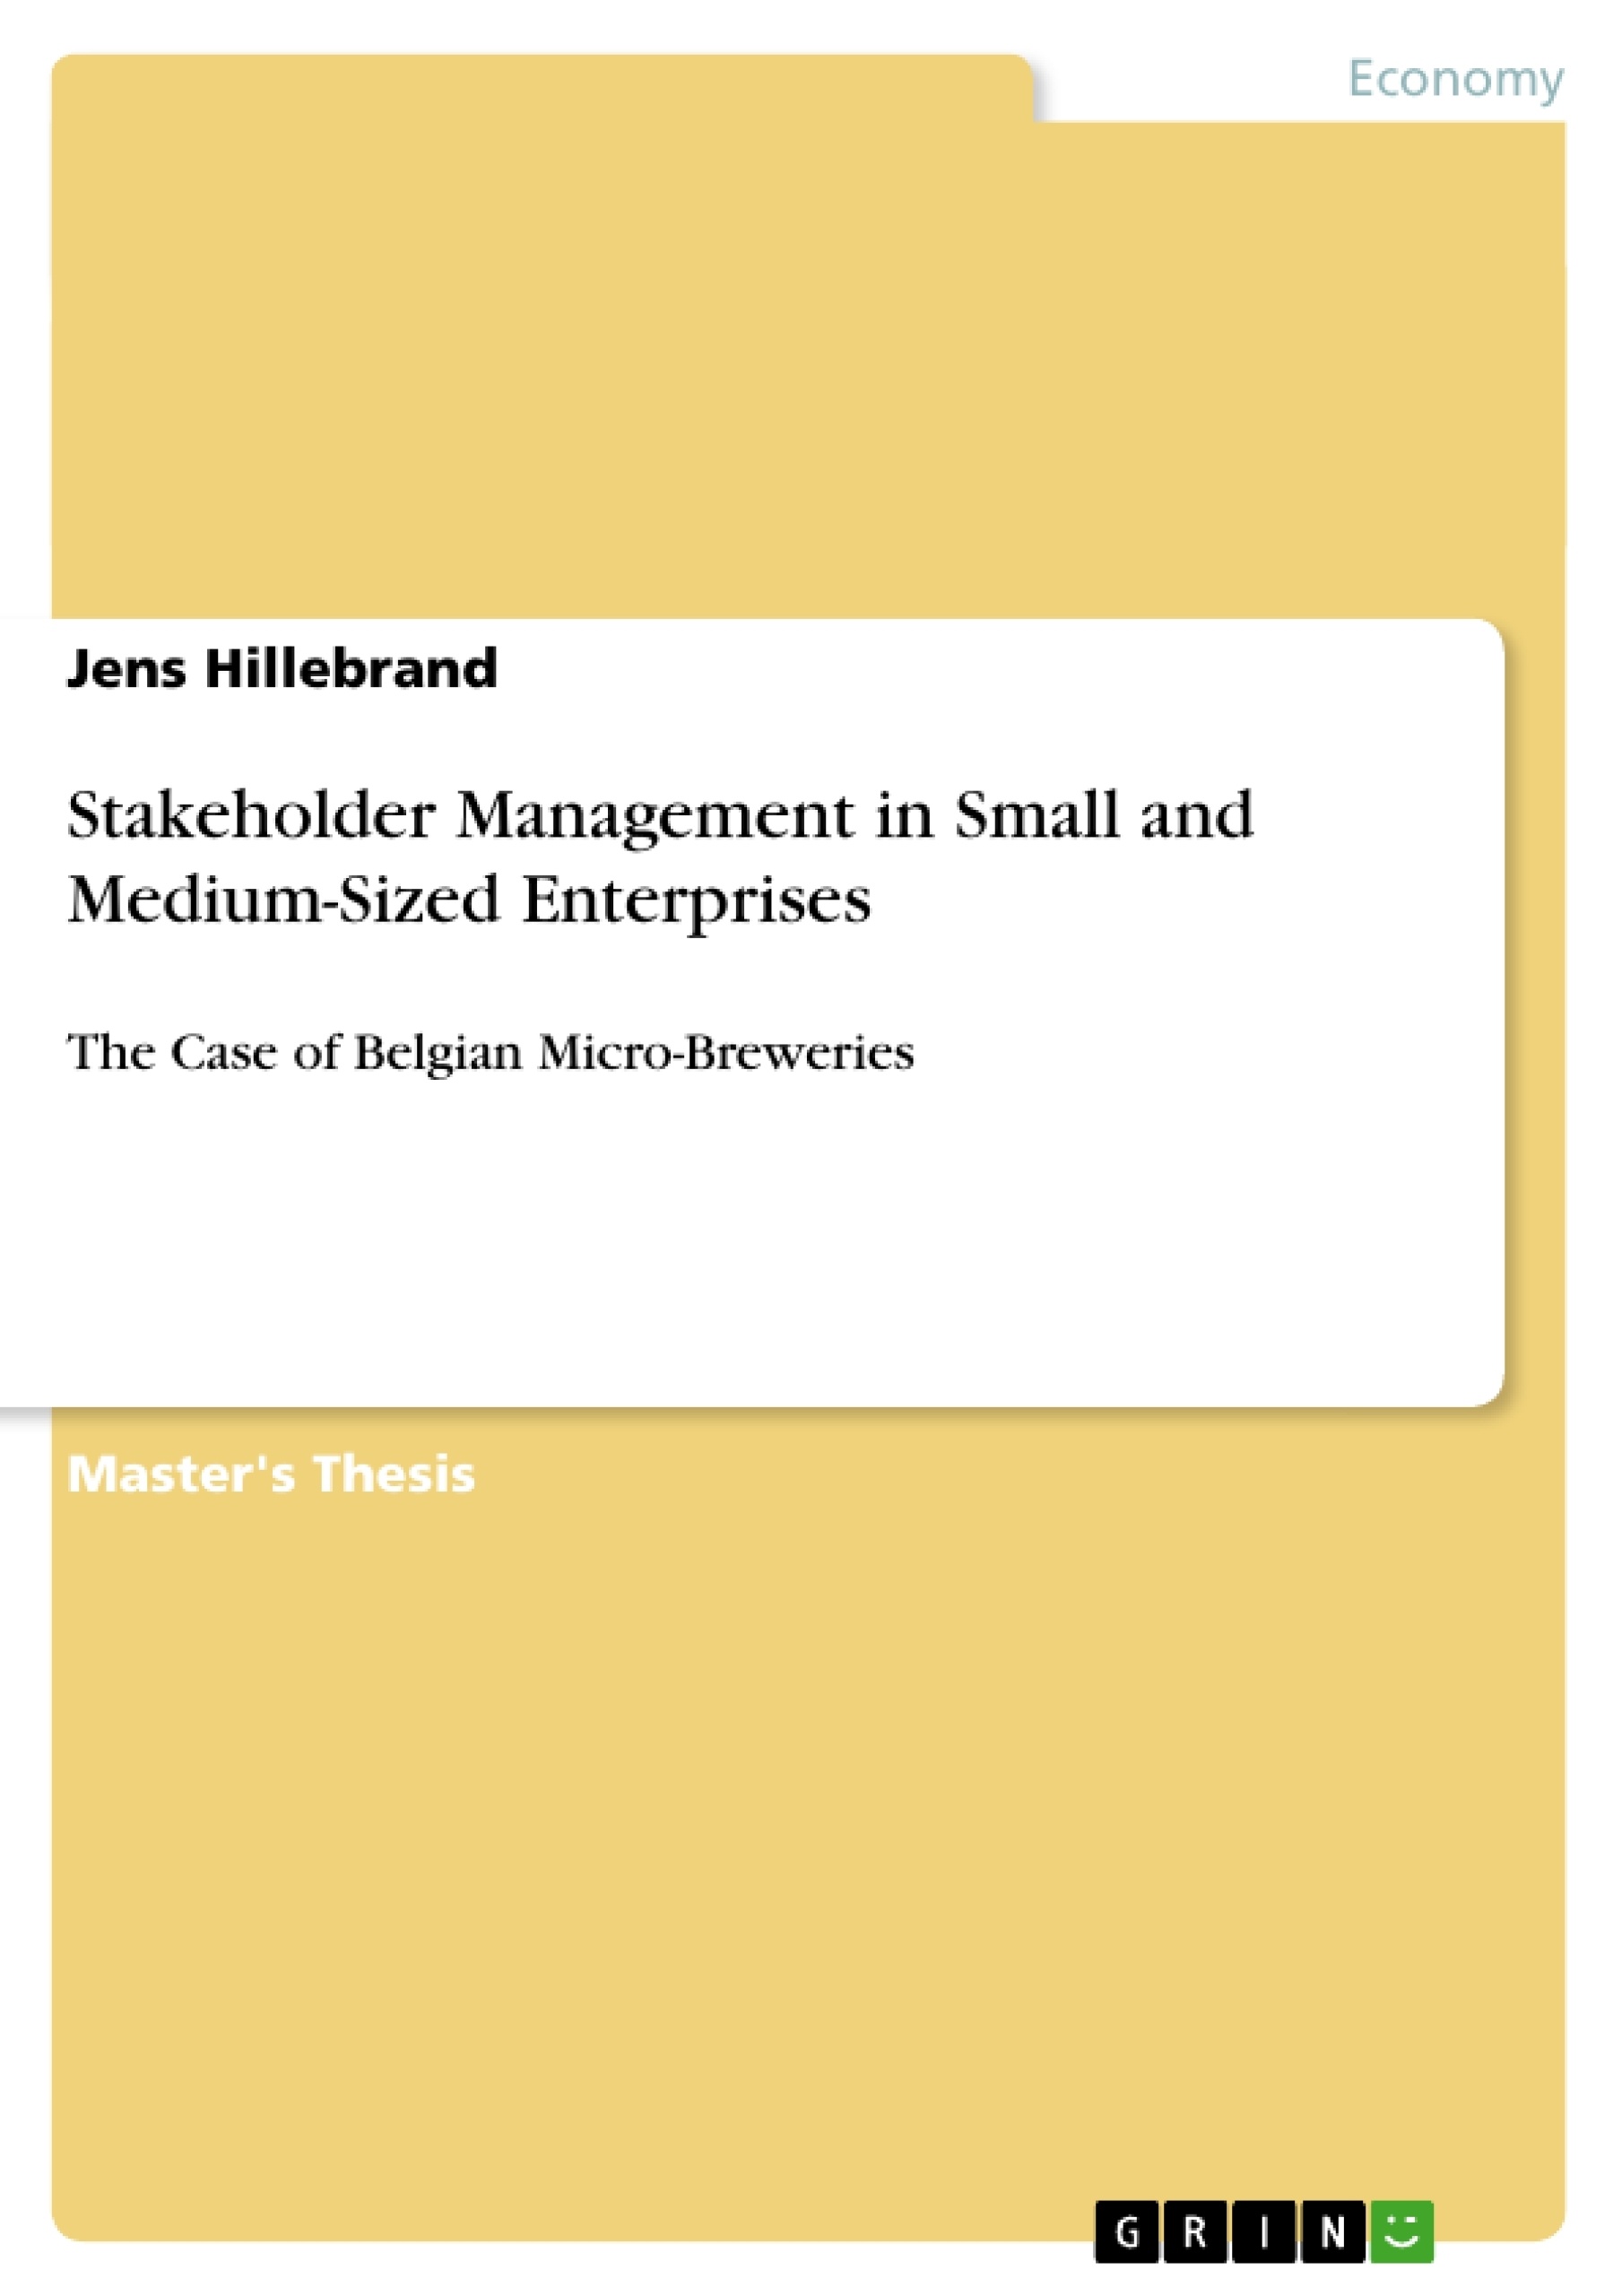 Title: Stakeholder Management in Small and Medium-Sized Enterprises